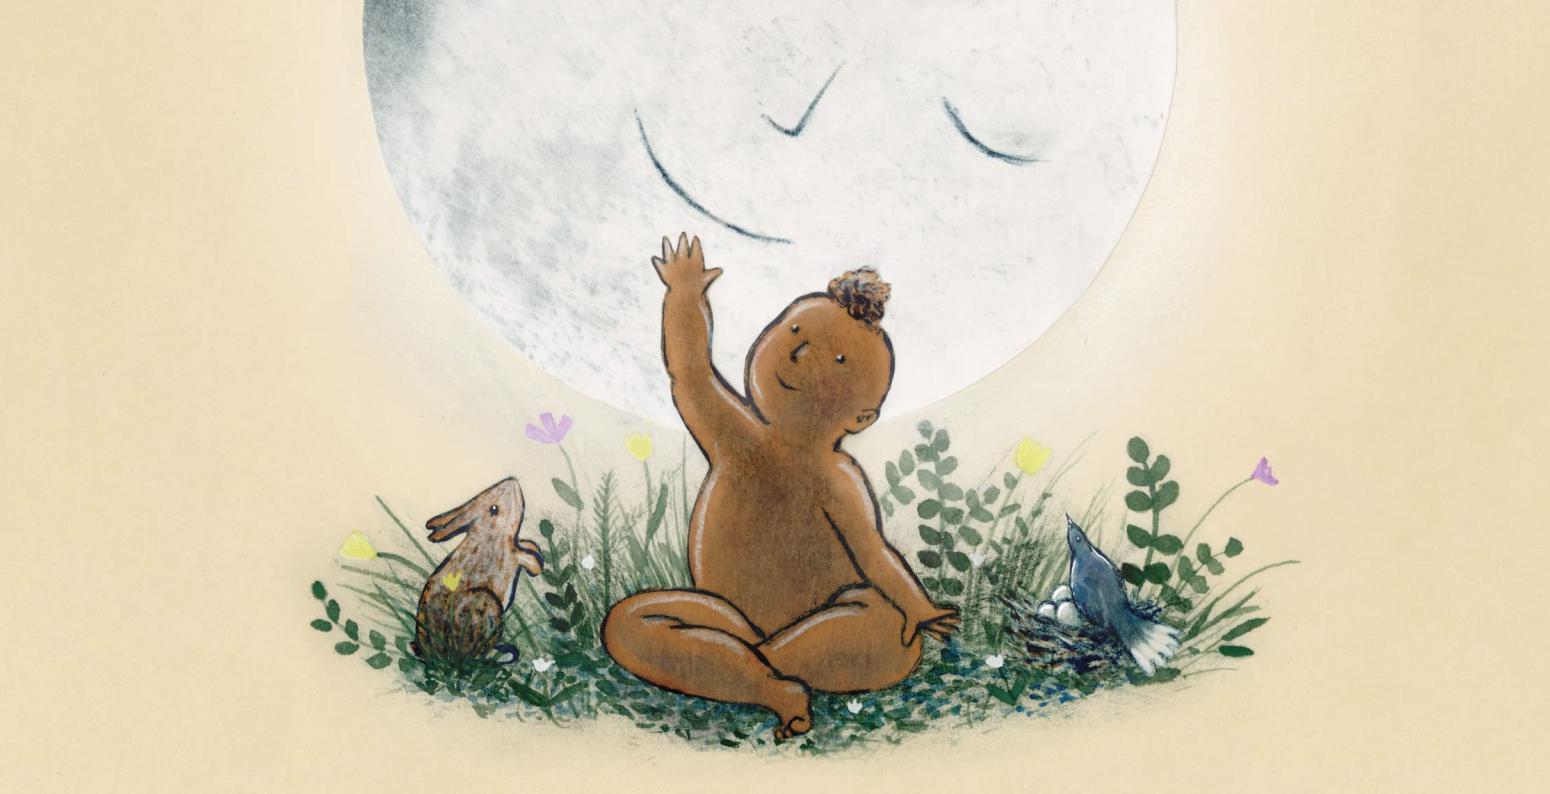 A baby sits on the grass next to a rabbit, and is pointing up to a smiling moon.